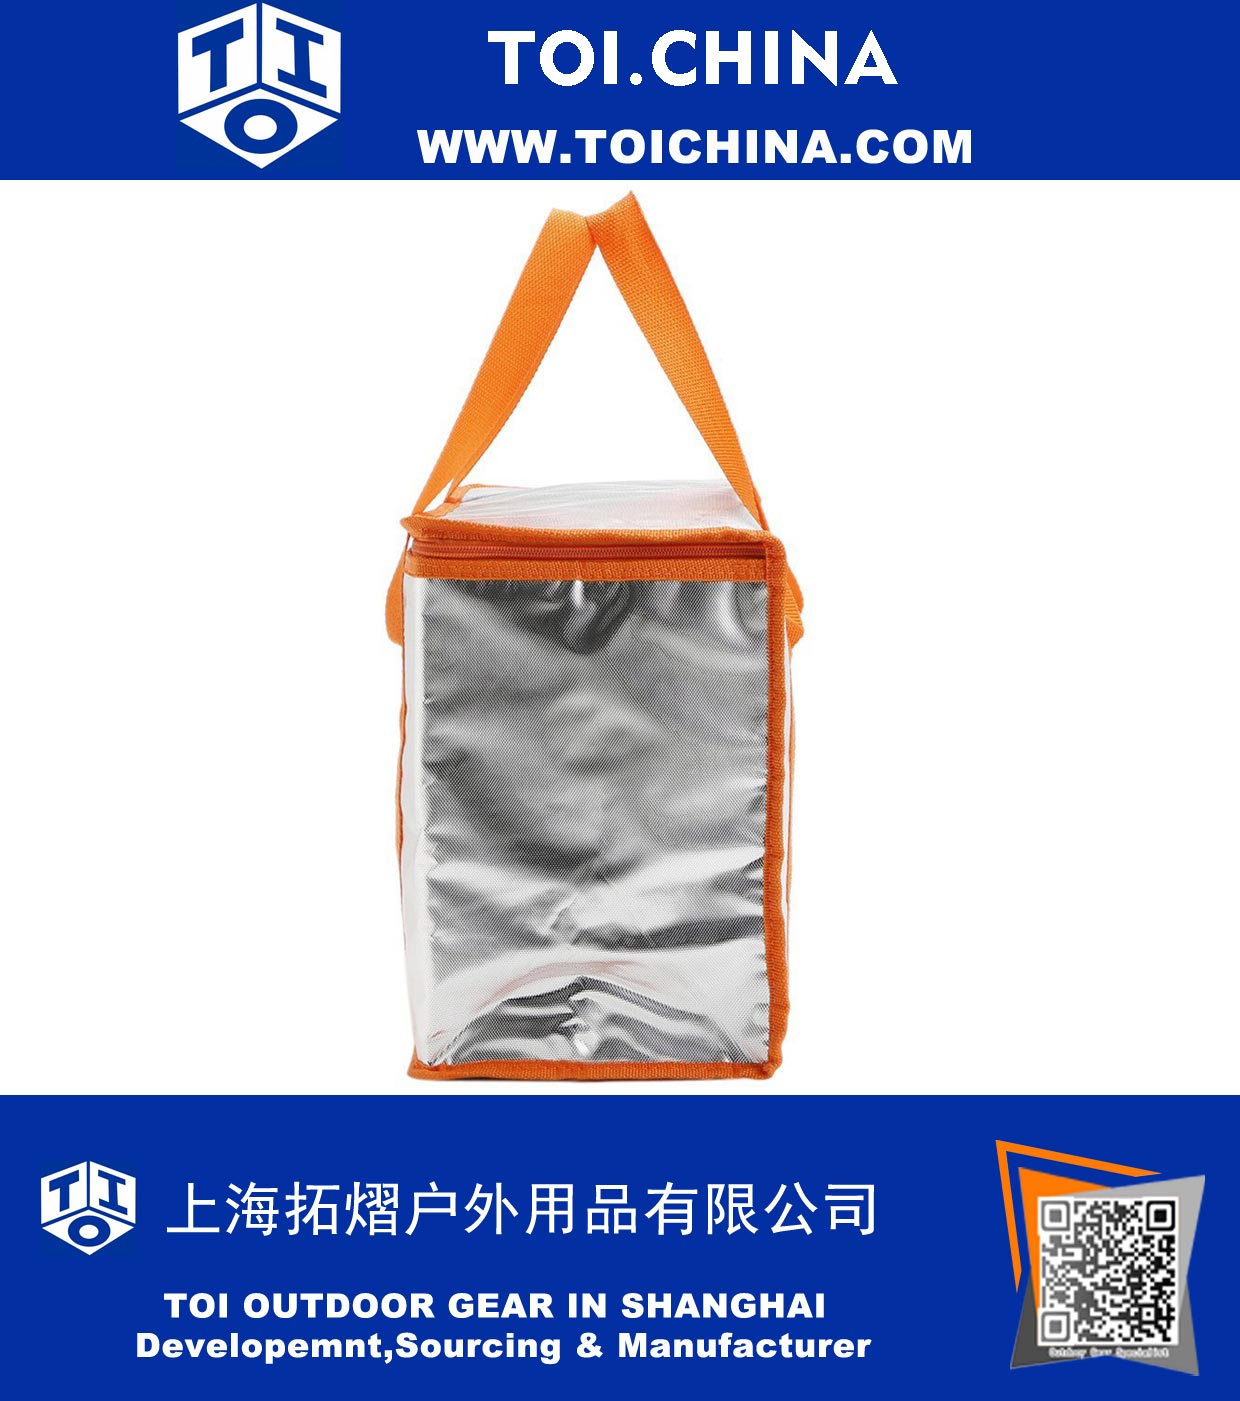 Insulated Picnic Bag